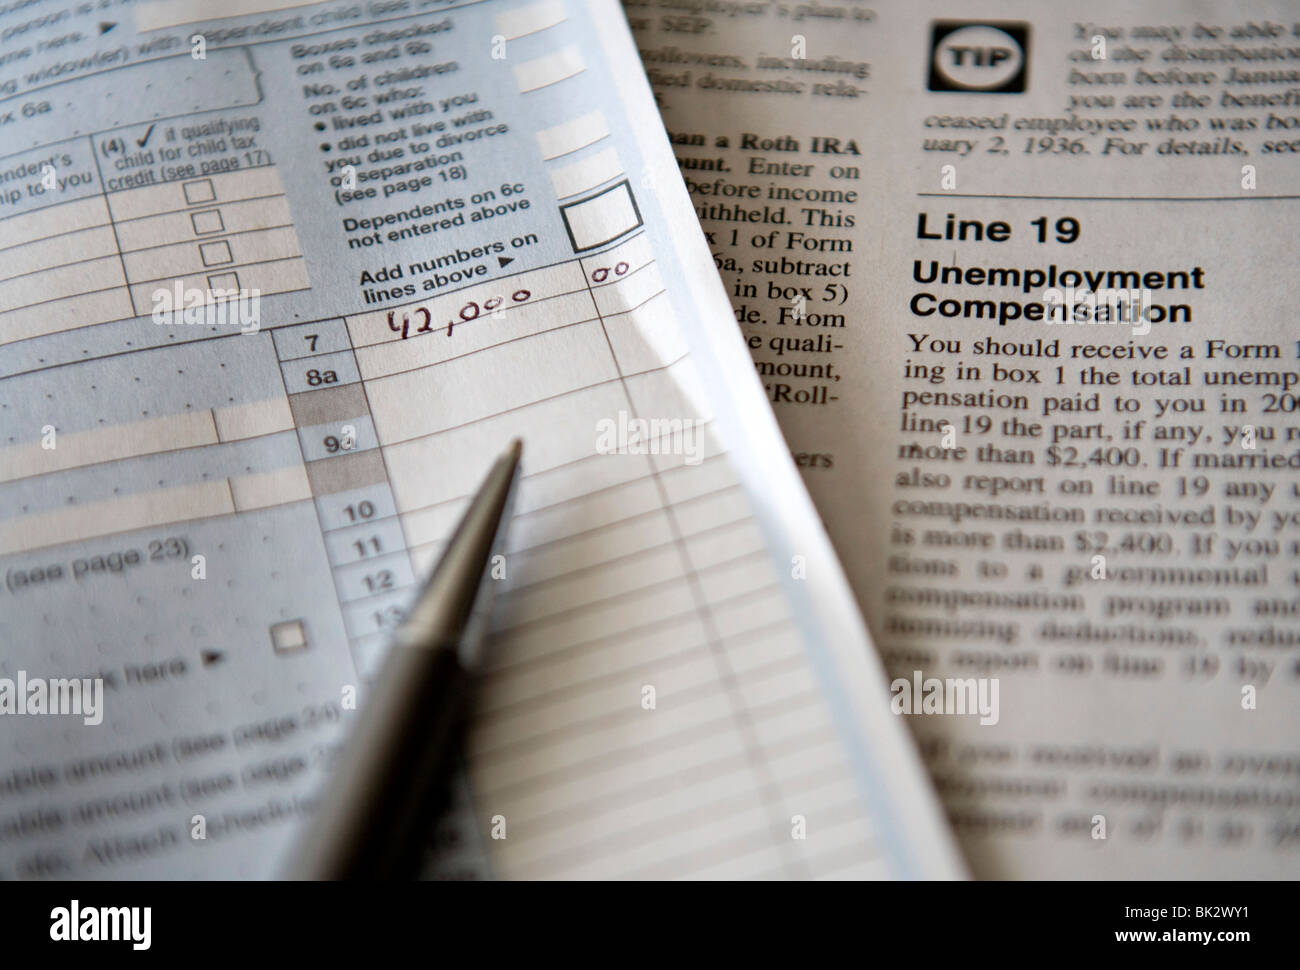 A United States Income Tax 1040 form. Stock Photo